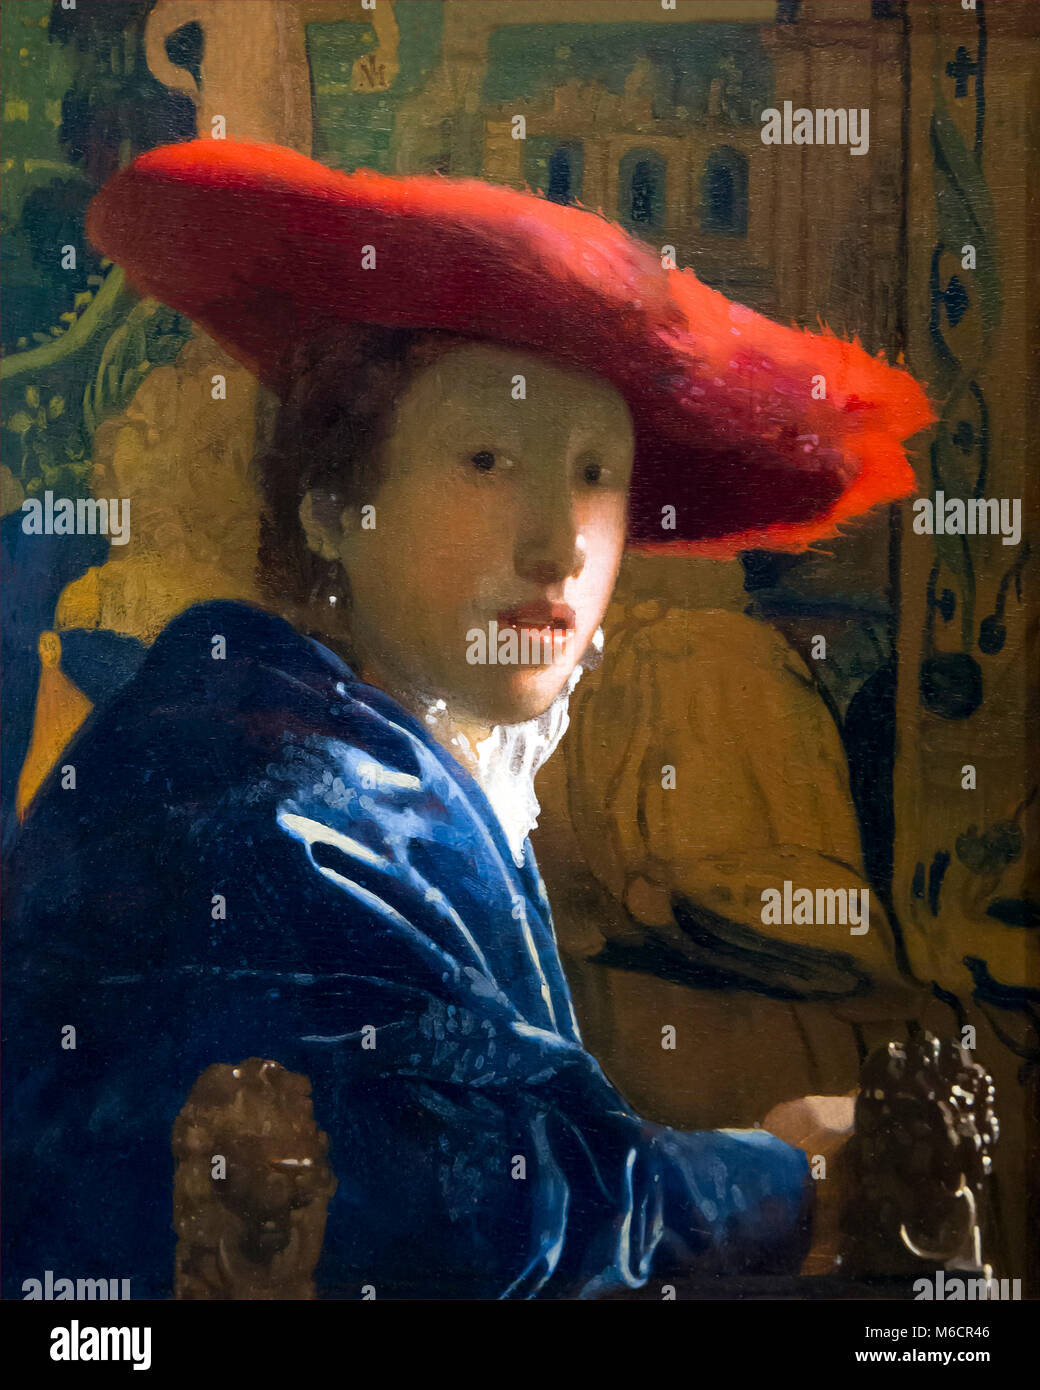 The Girl with the Red Hat, Johannes Vermeer, circa 1665,National Gallery of Art, Washington DC, USA, North America Stock Photo